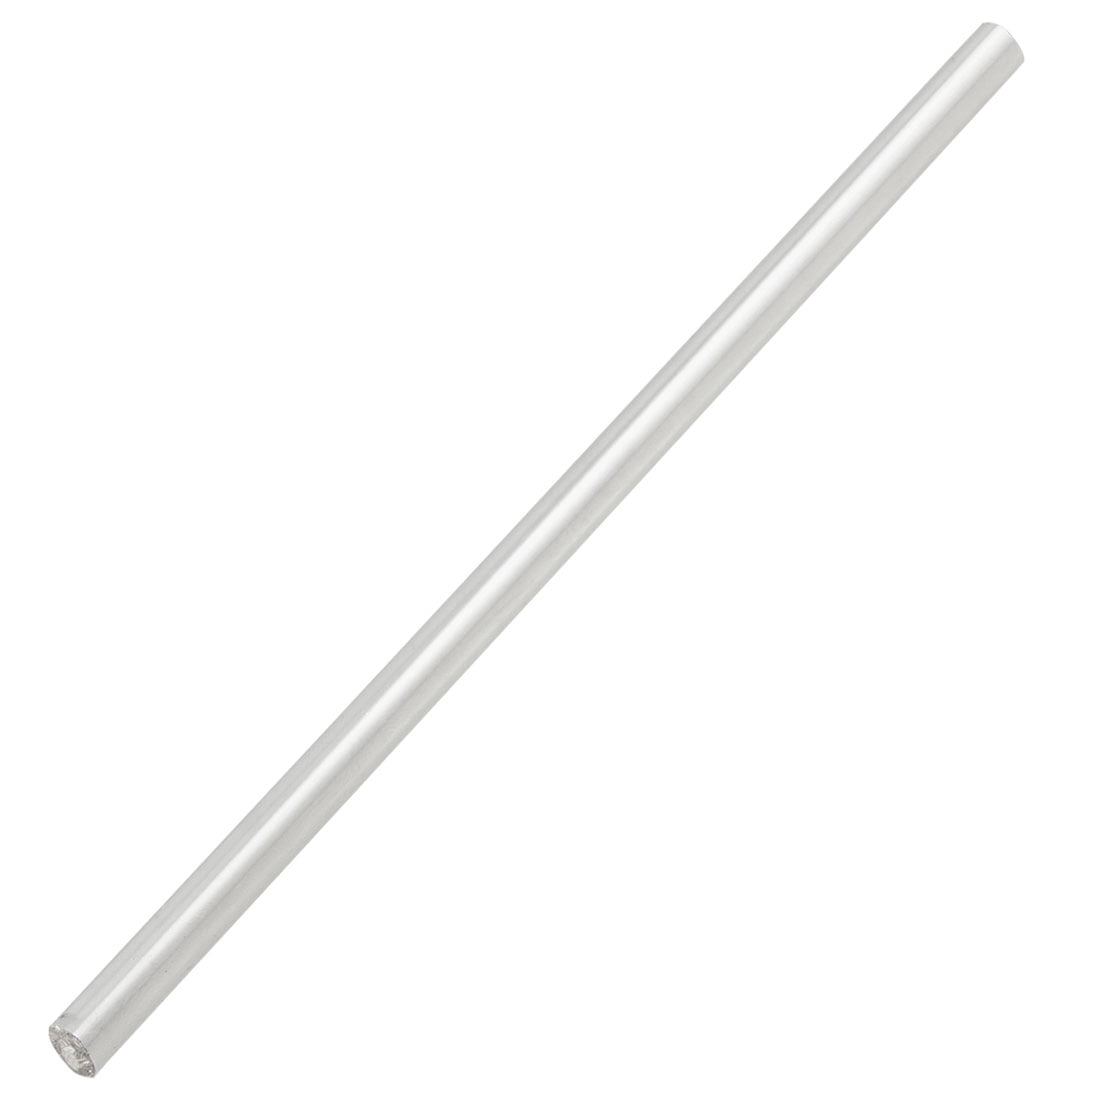 15/64 x 9 Stainless Steel Round Bar Stock Rod Silver Tone 